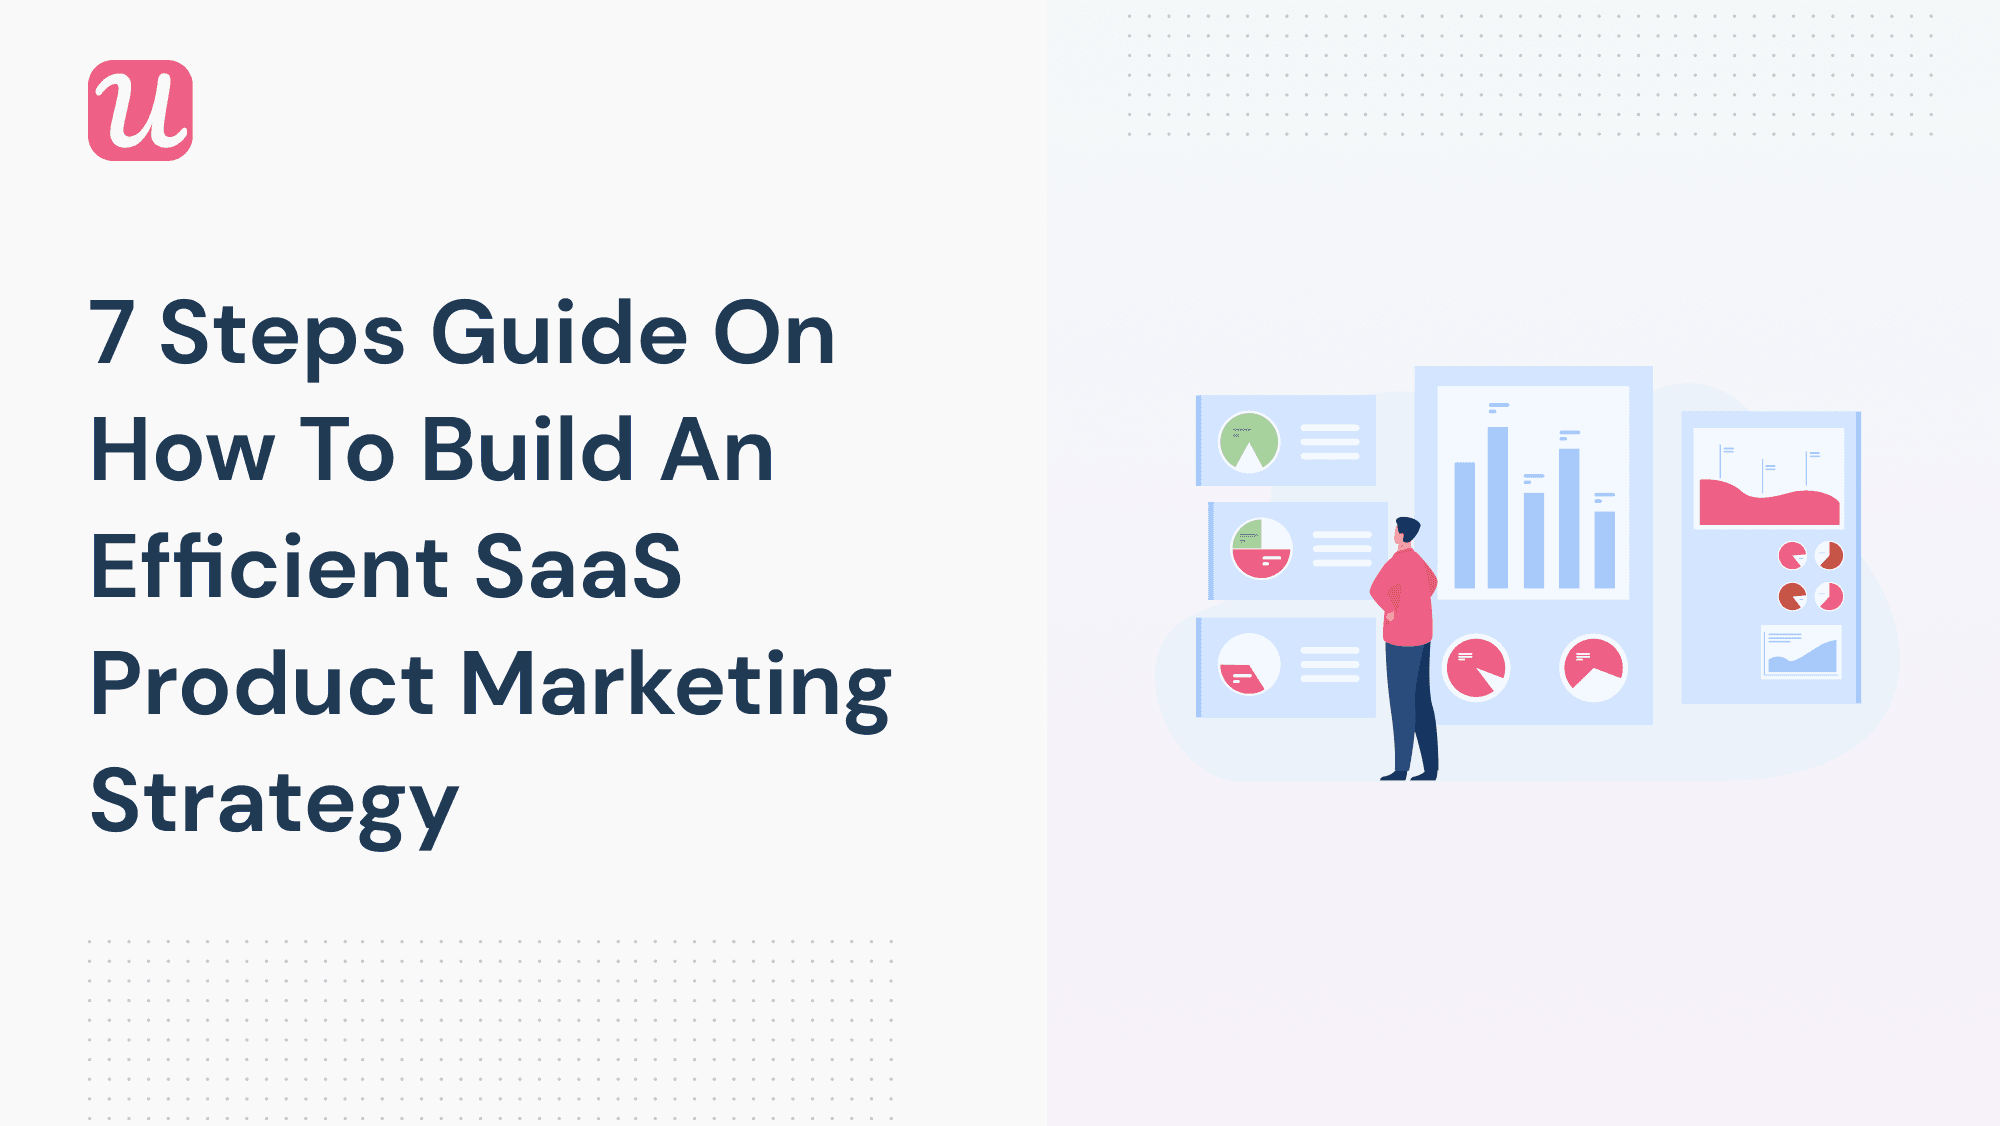 7 Step Guide On How To Build An Efficient SaaS Product Marketing Strategy